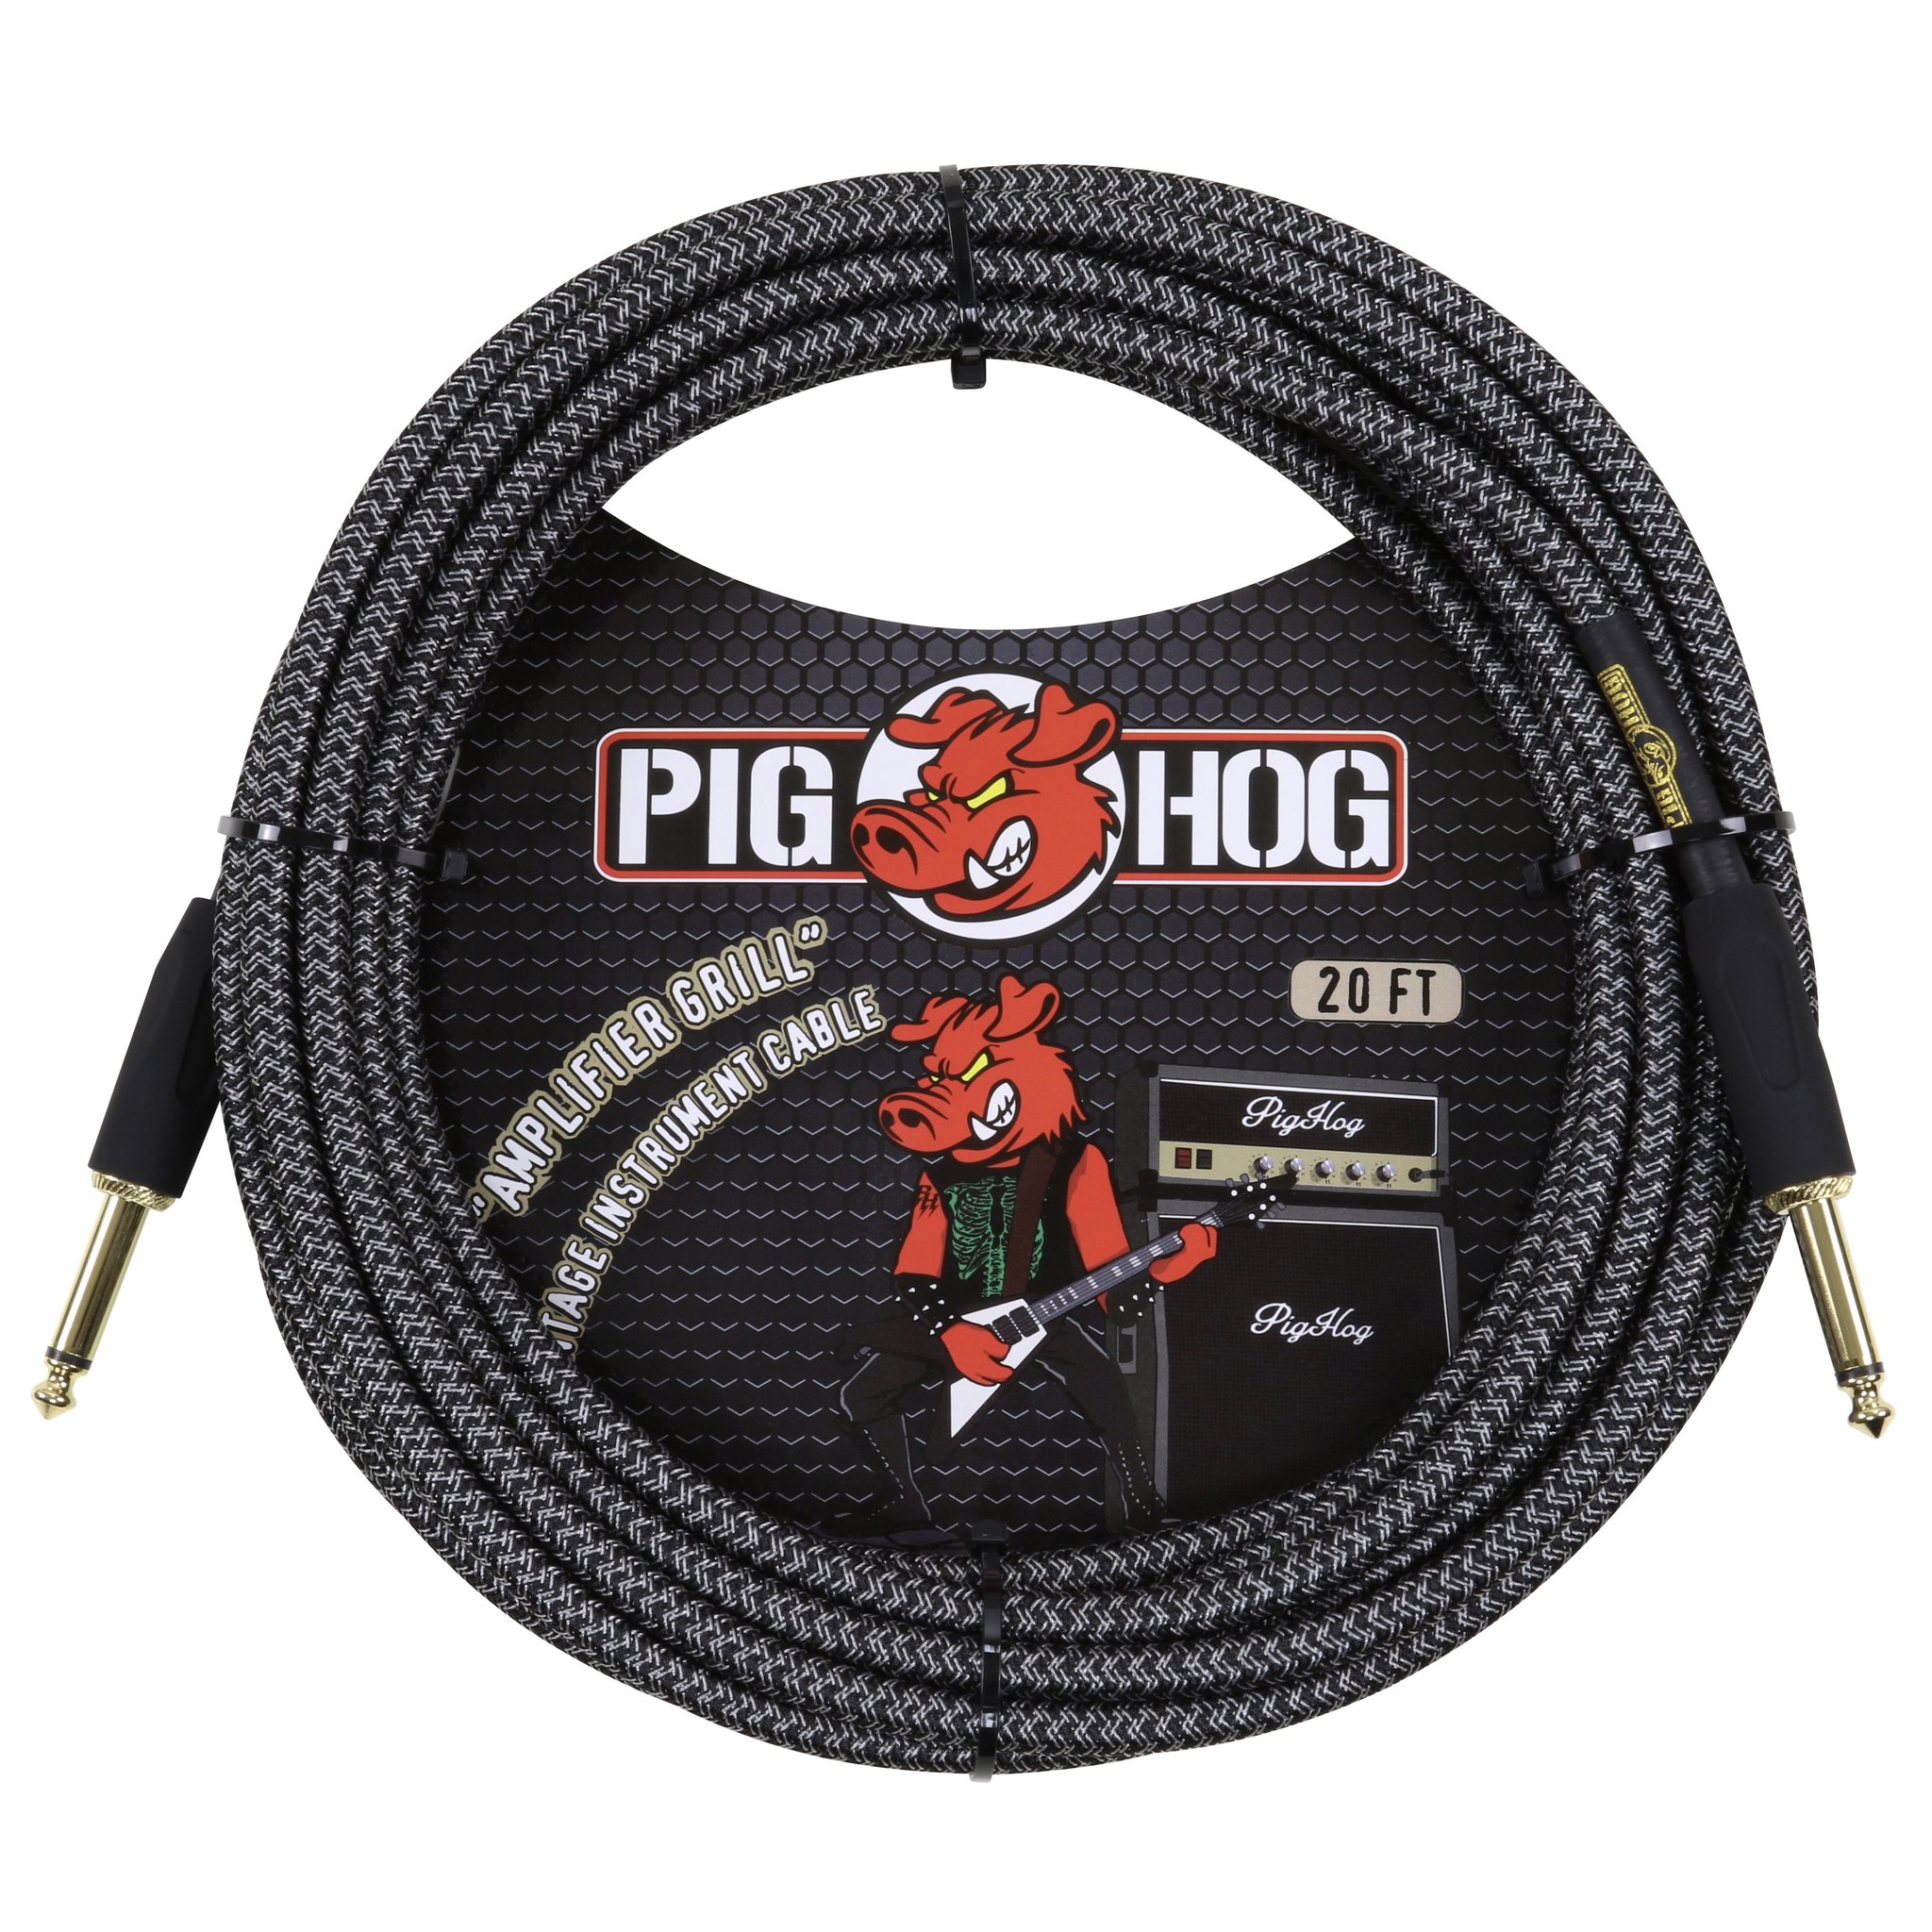 Pig Hog "Amplifier Grill" (Black/Silver) Vintage Woven 20-foot Instrument Cable, 1/4" Straight Plugs